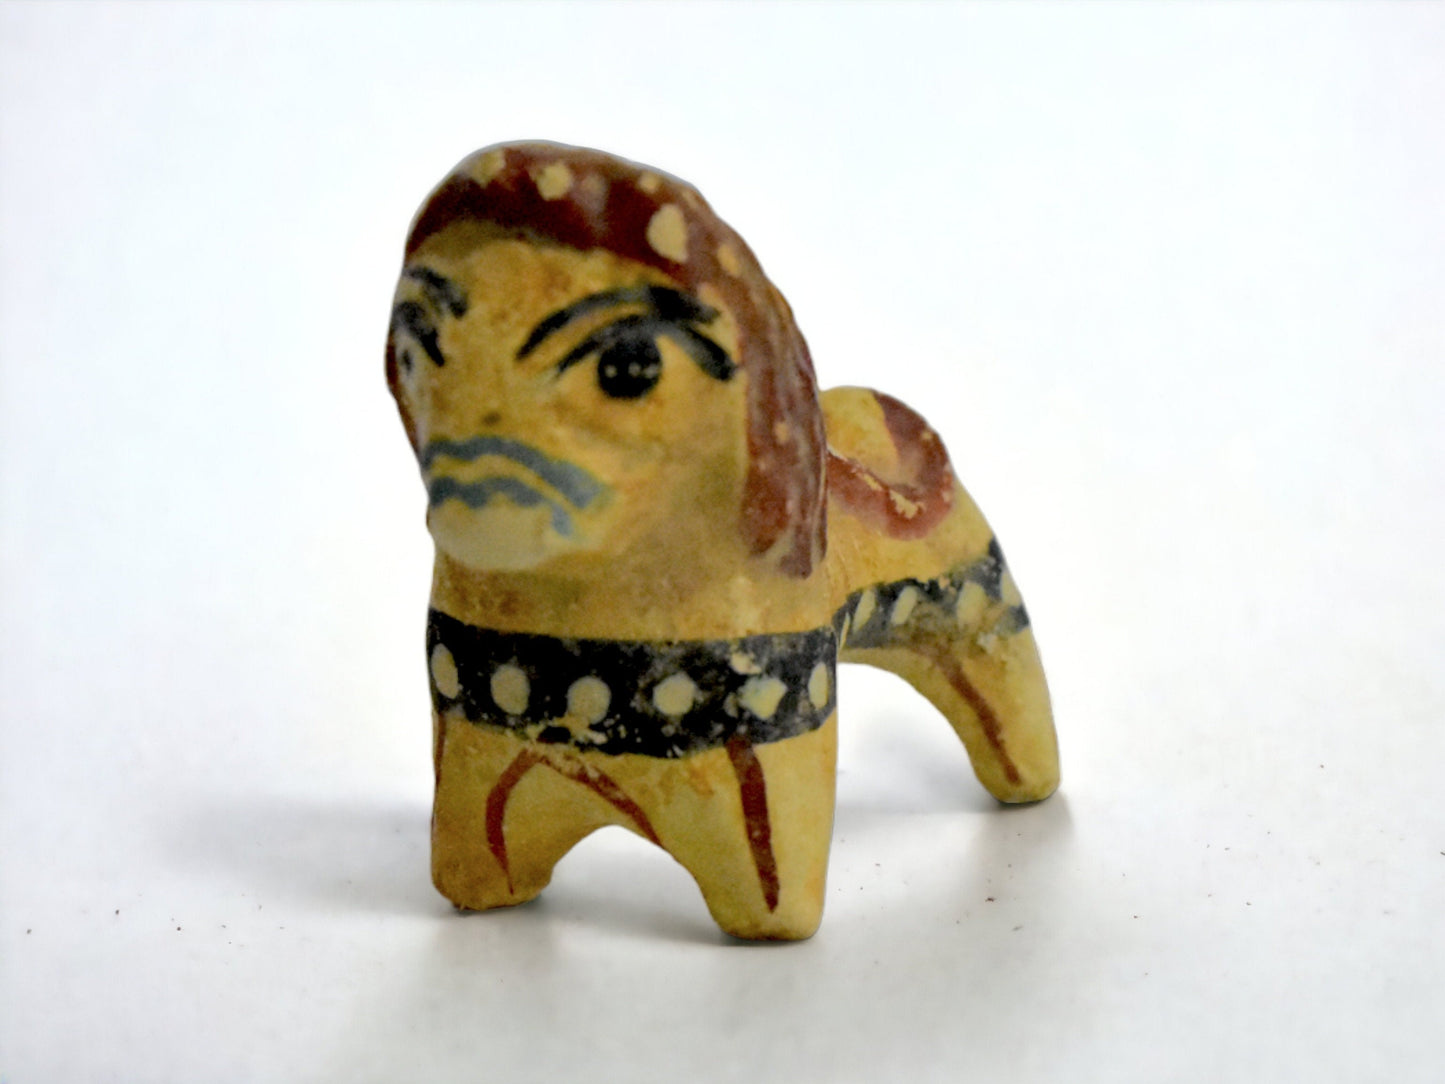 Idol of a Lion -  Mycenae - 1100 BC - Symbol of courage, nobility, royalty, strength - Miniature - Museum Reproduction - Ceramic Artifact